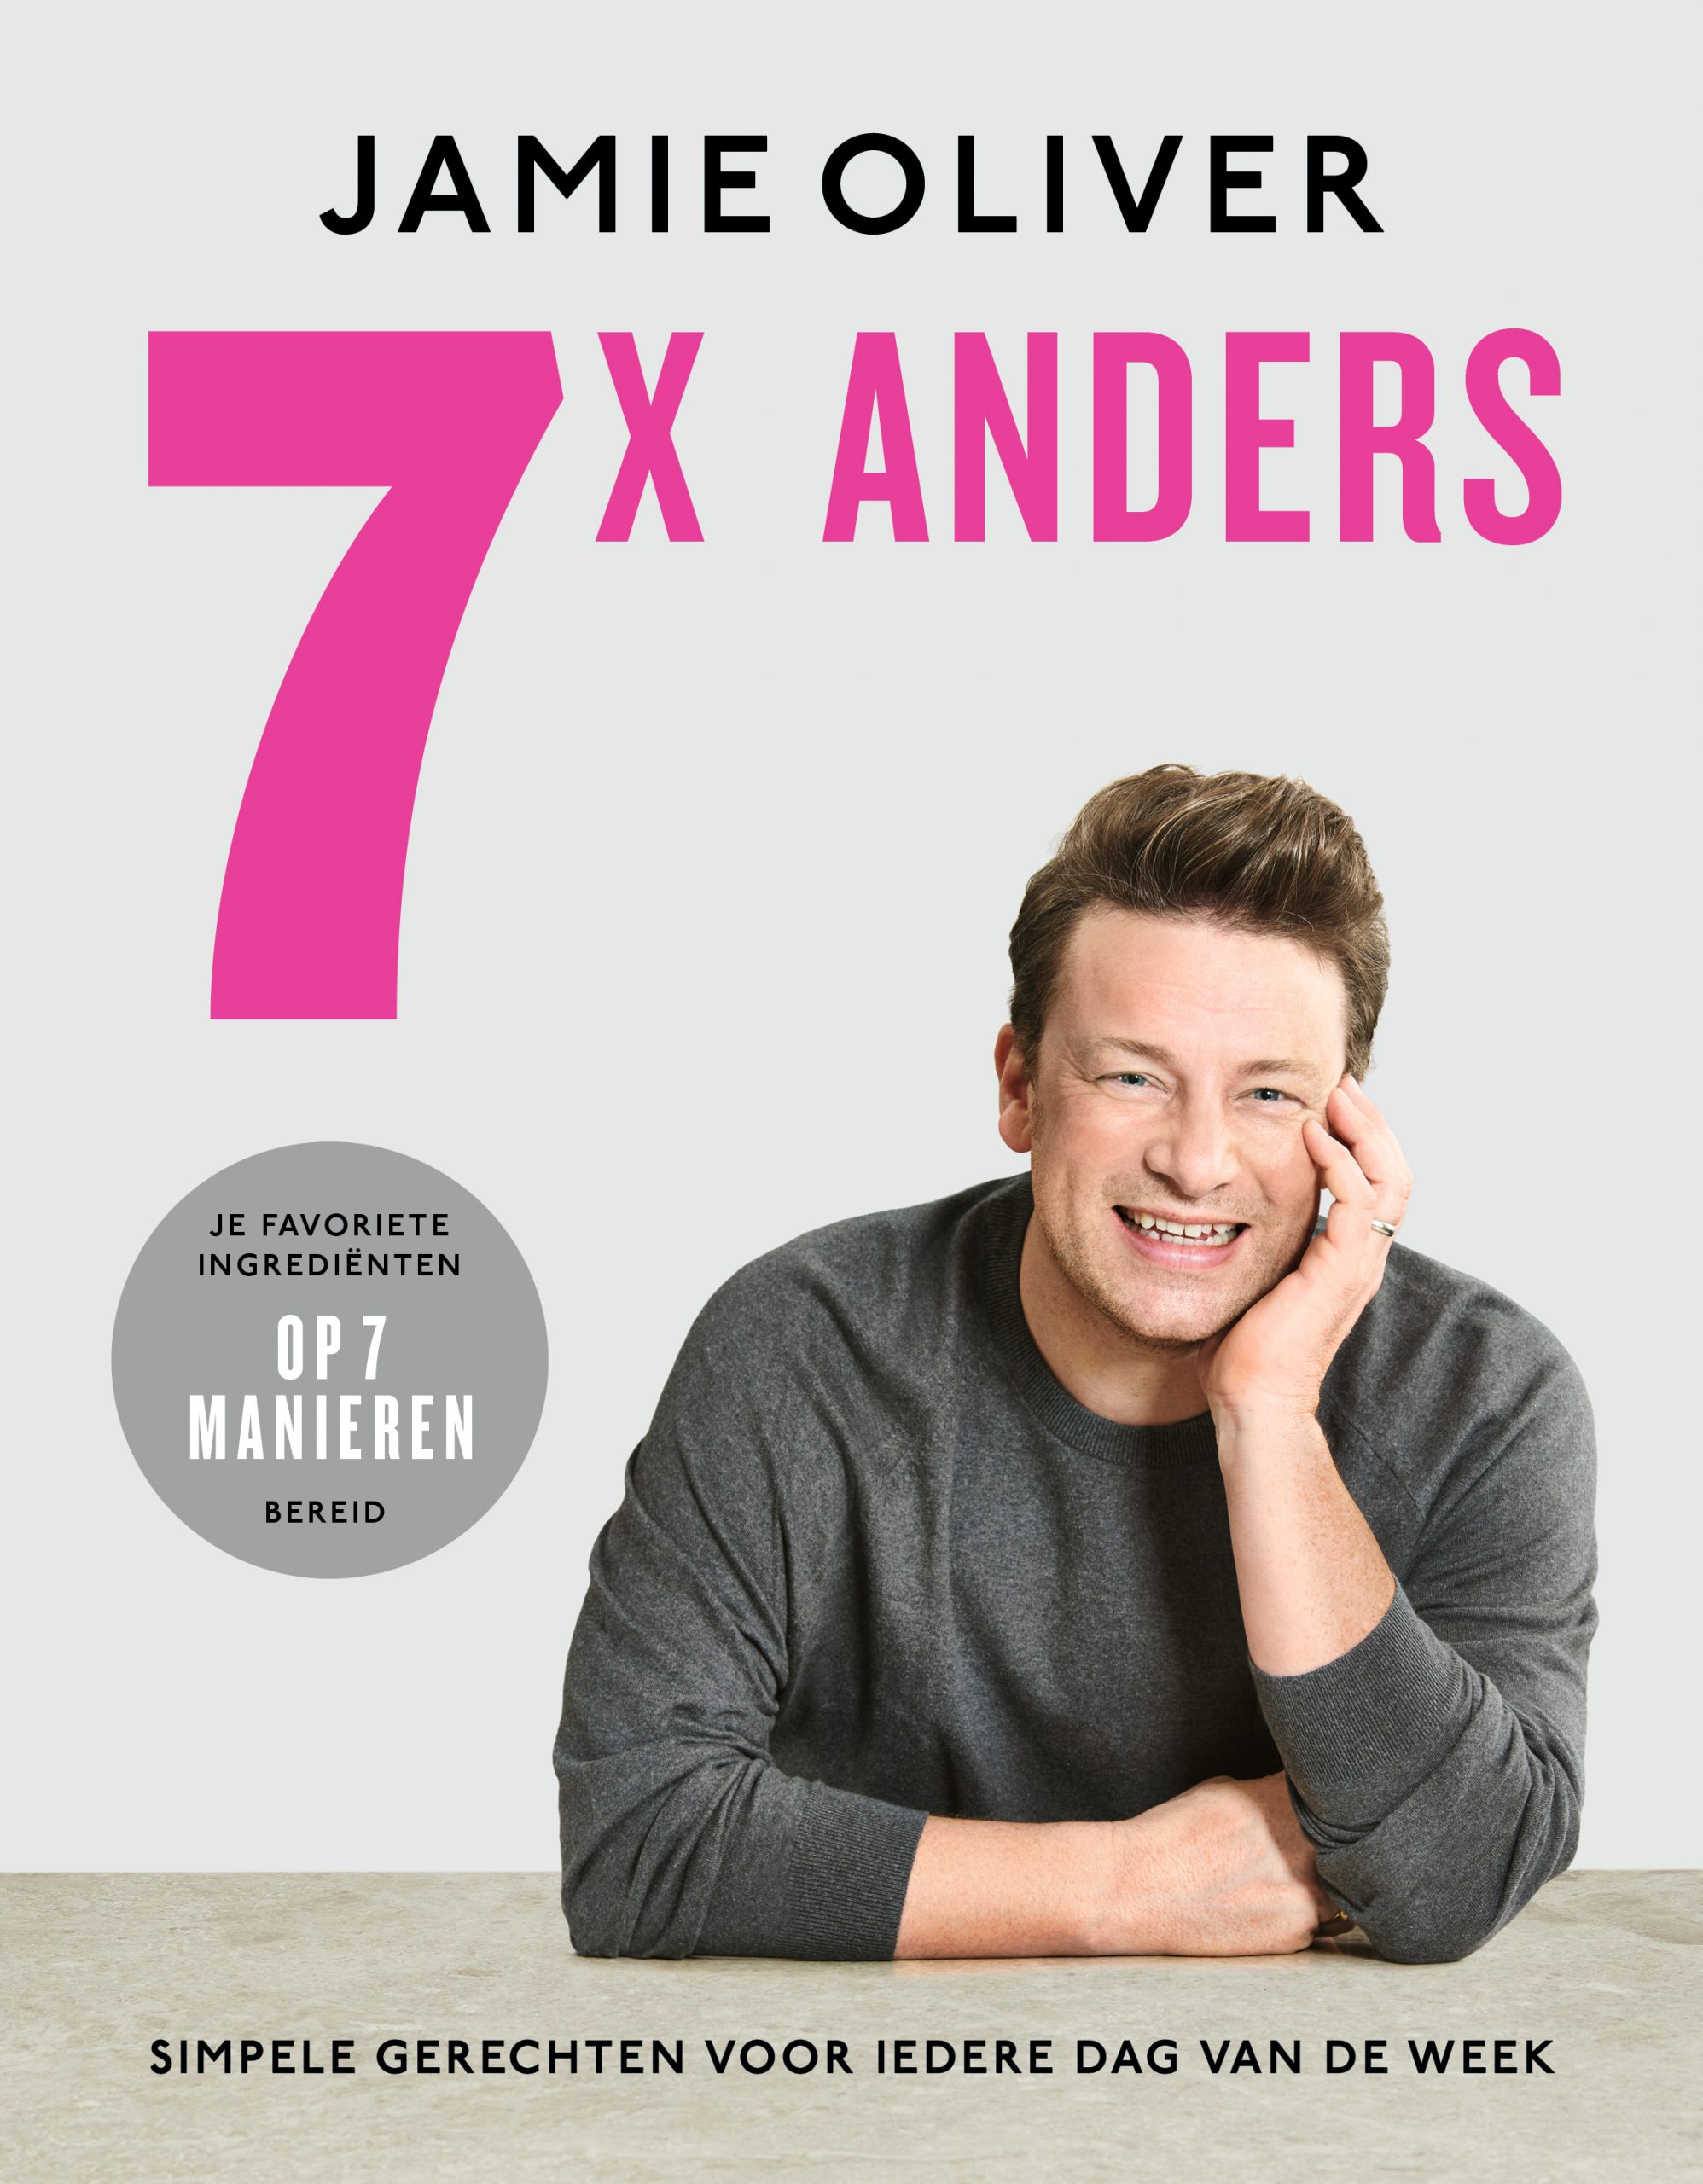 7x anders